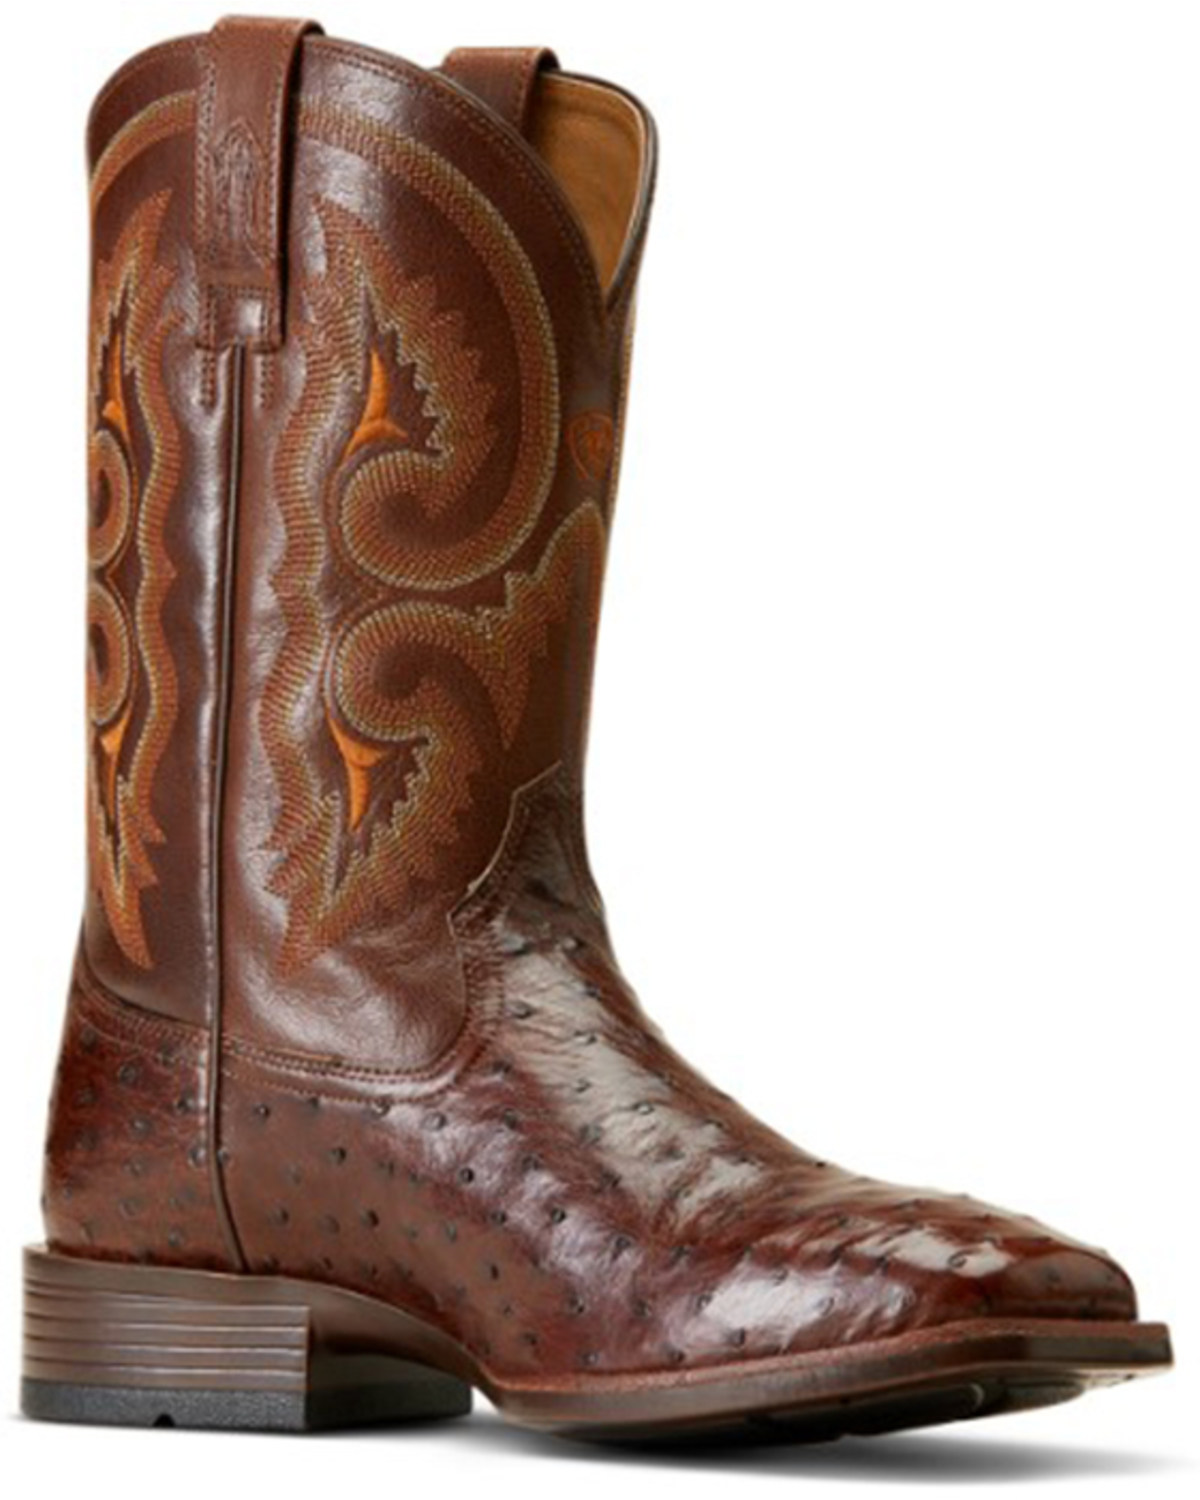 Ariat Men's Barley Ultra Exotic Full Quill Ostrich Western Boots - Broad Square Toe